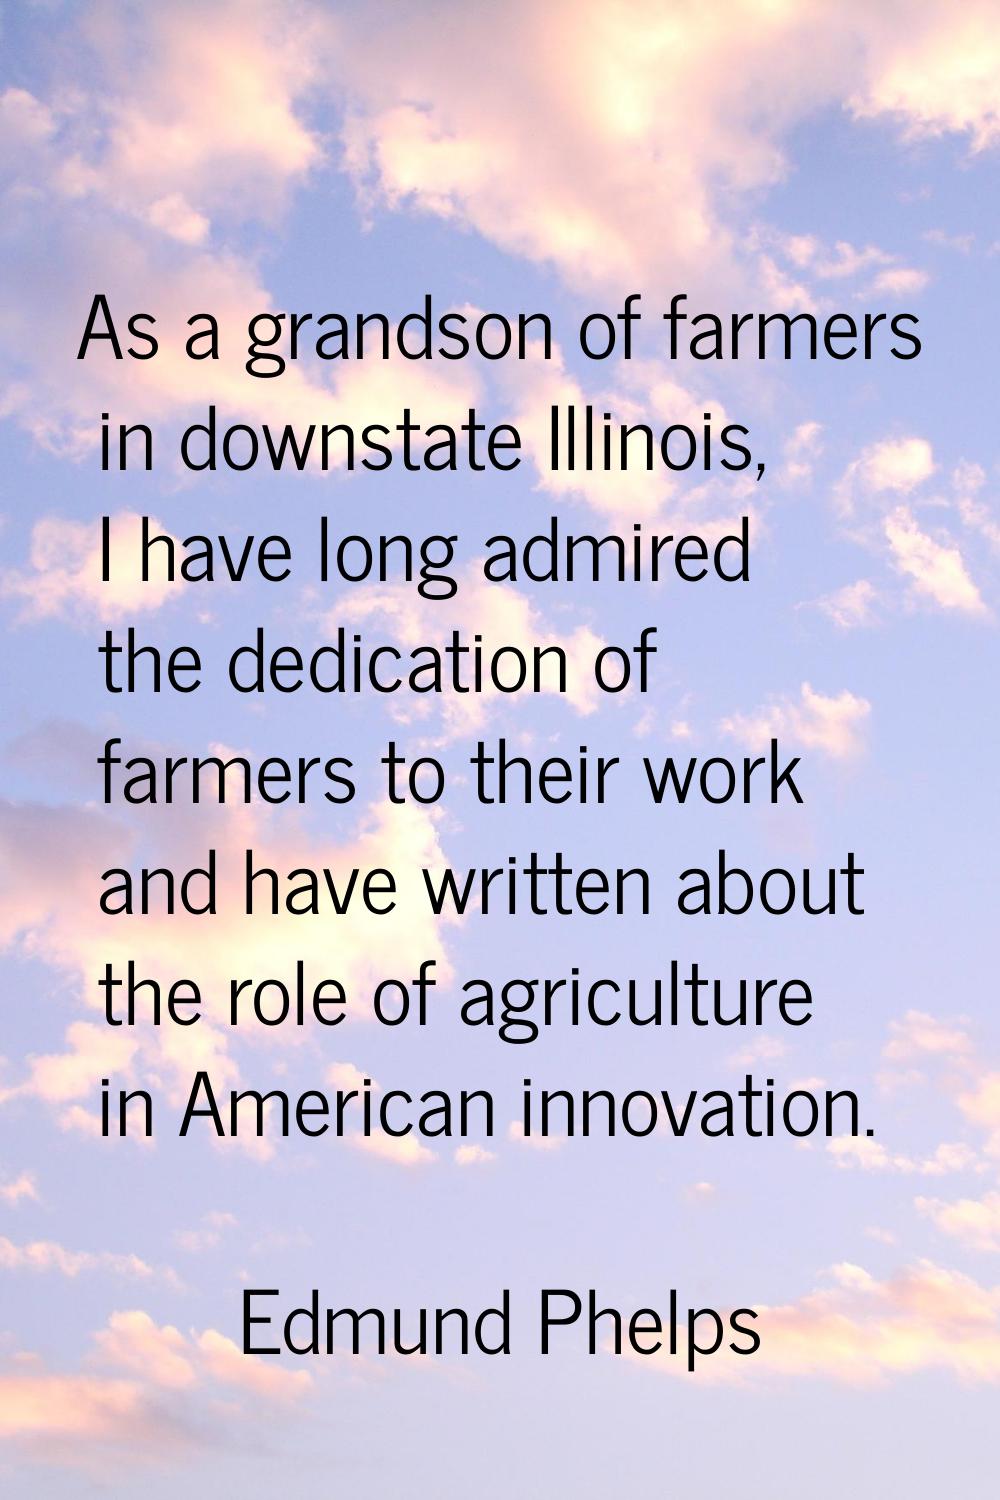 As a grandson of farmers in downstate Illinois, I have long admired the dedication of farmers to th